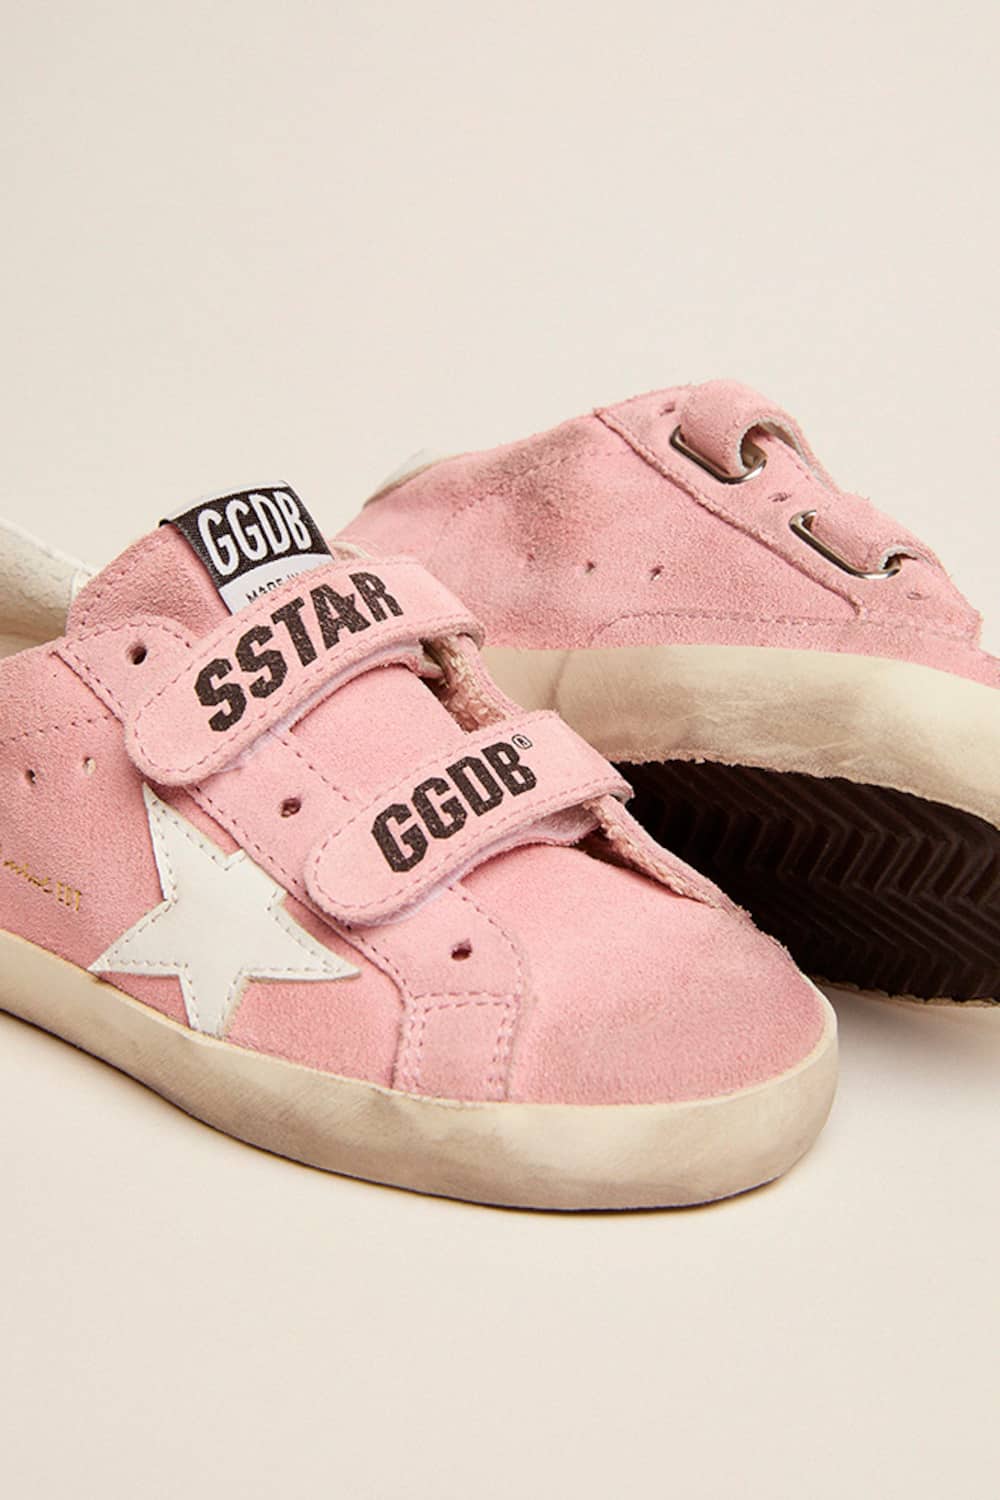 Golden Goose - Old School Young in suede rosa con stella e talloncino in pelle in 